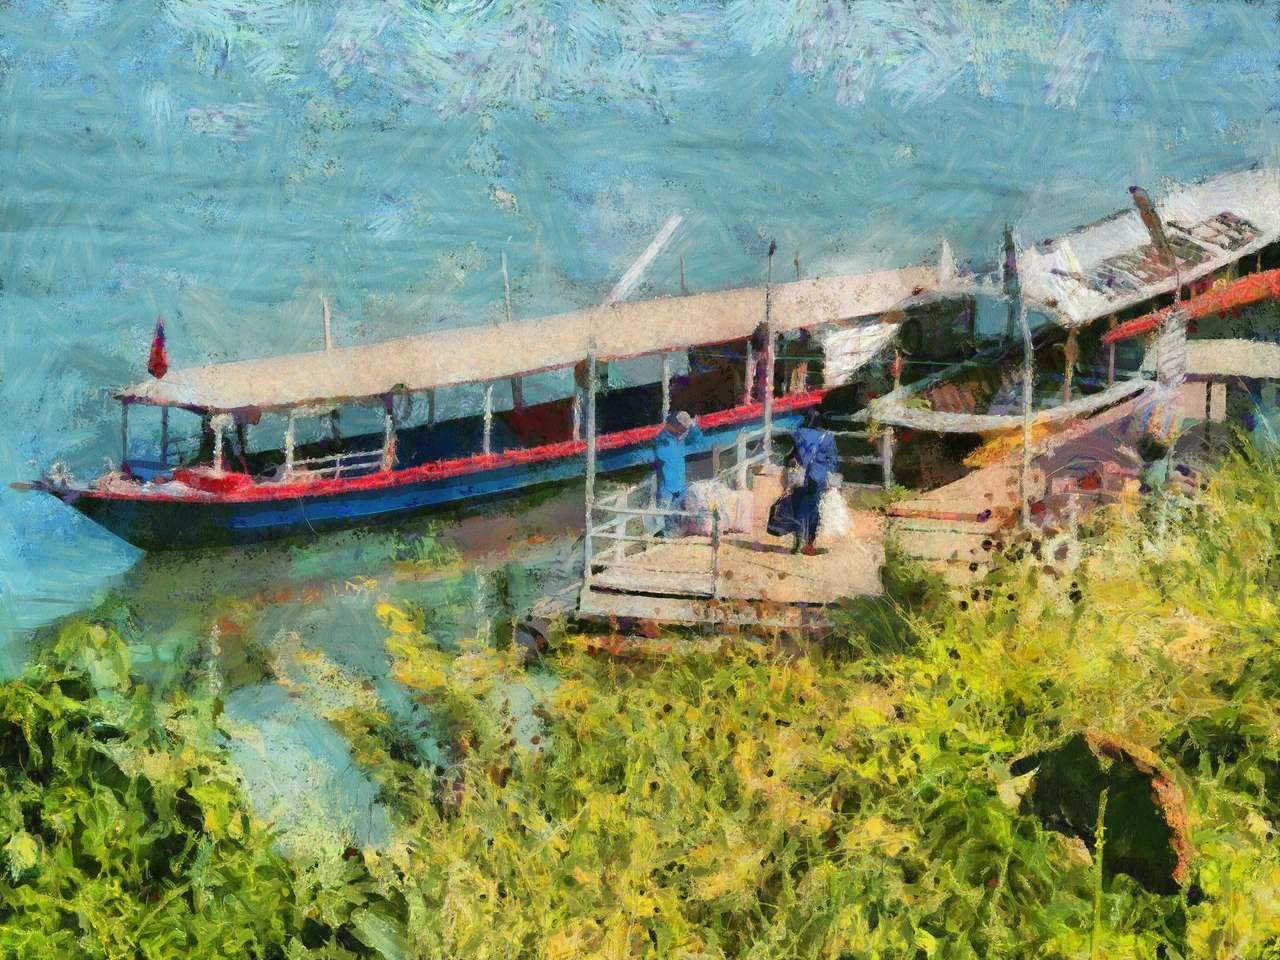 Mekong River Boats Puzzlespiel online